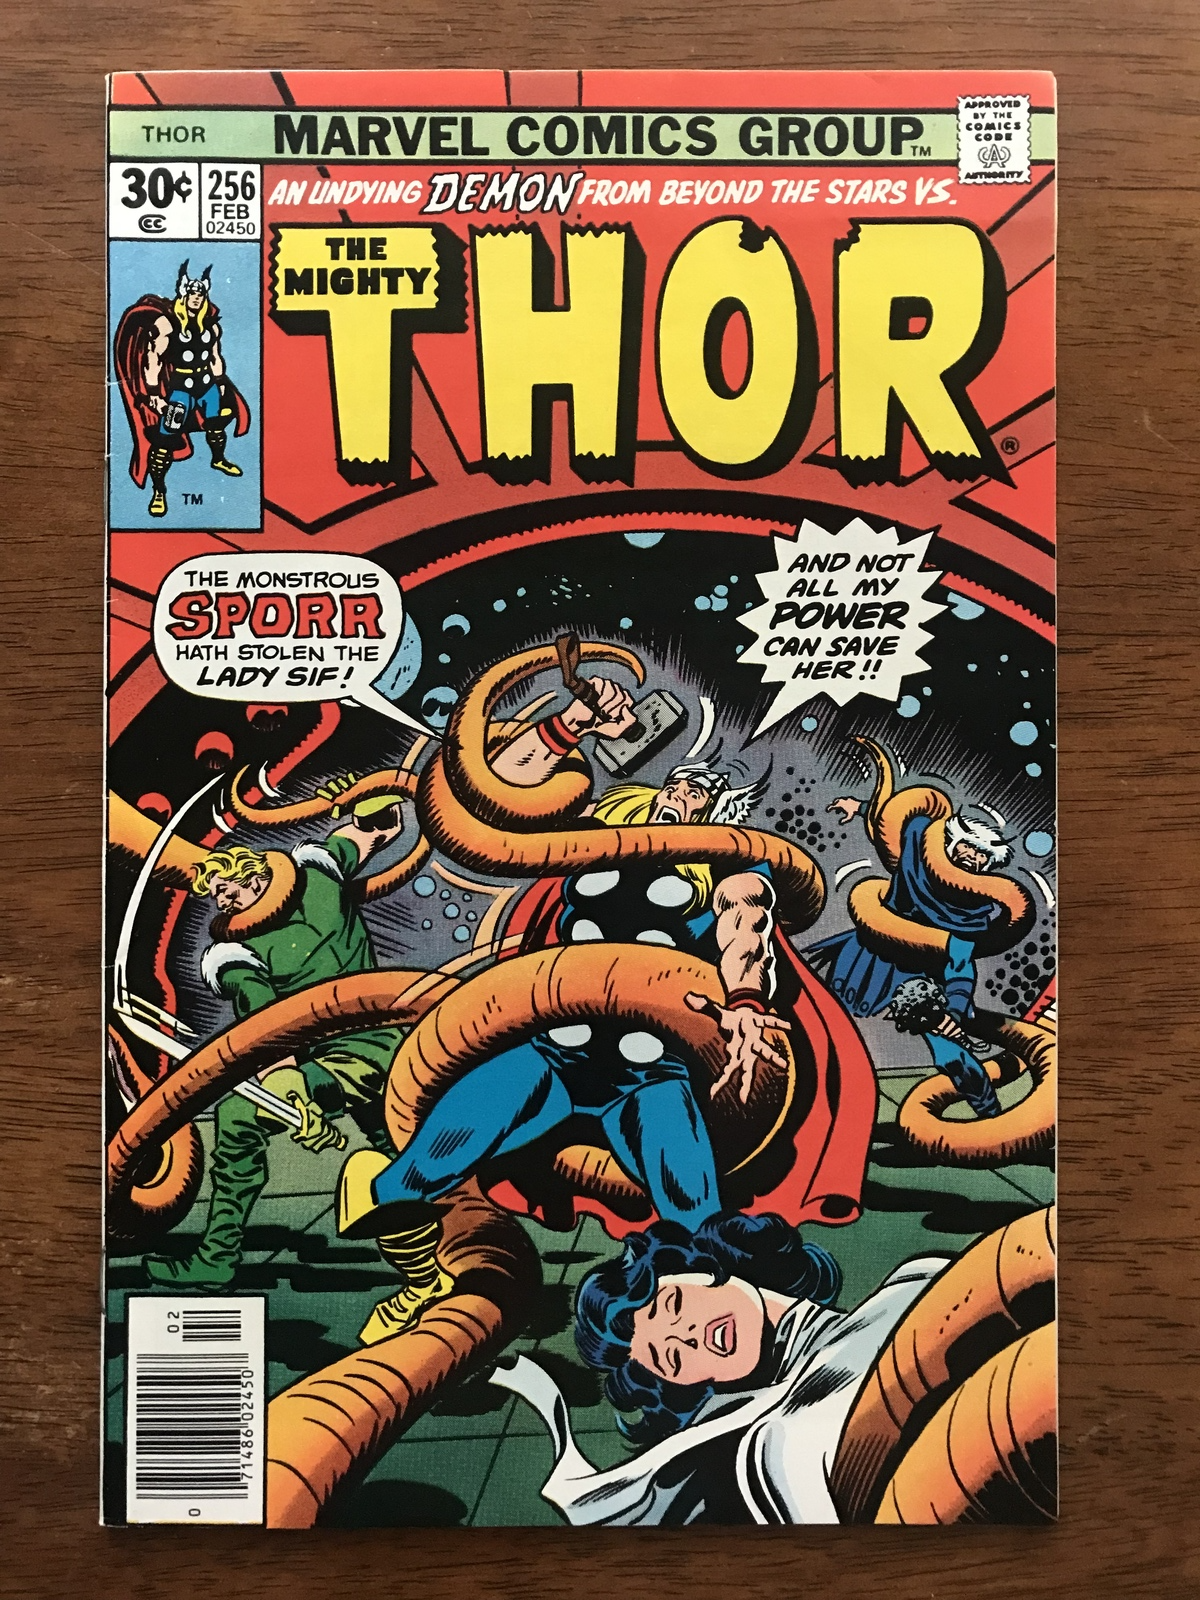 Primary image for THOR # 256 VF 8.0 White Pages ! Perfect Corners ! Newstand Colors ! Full Gloss !